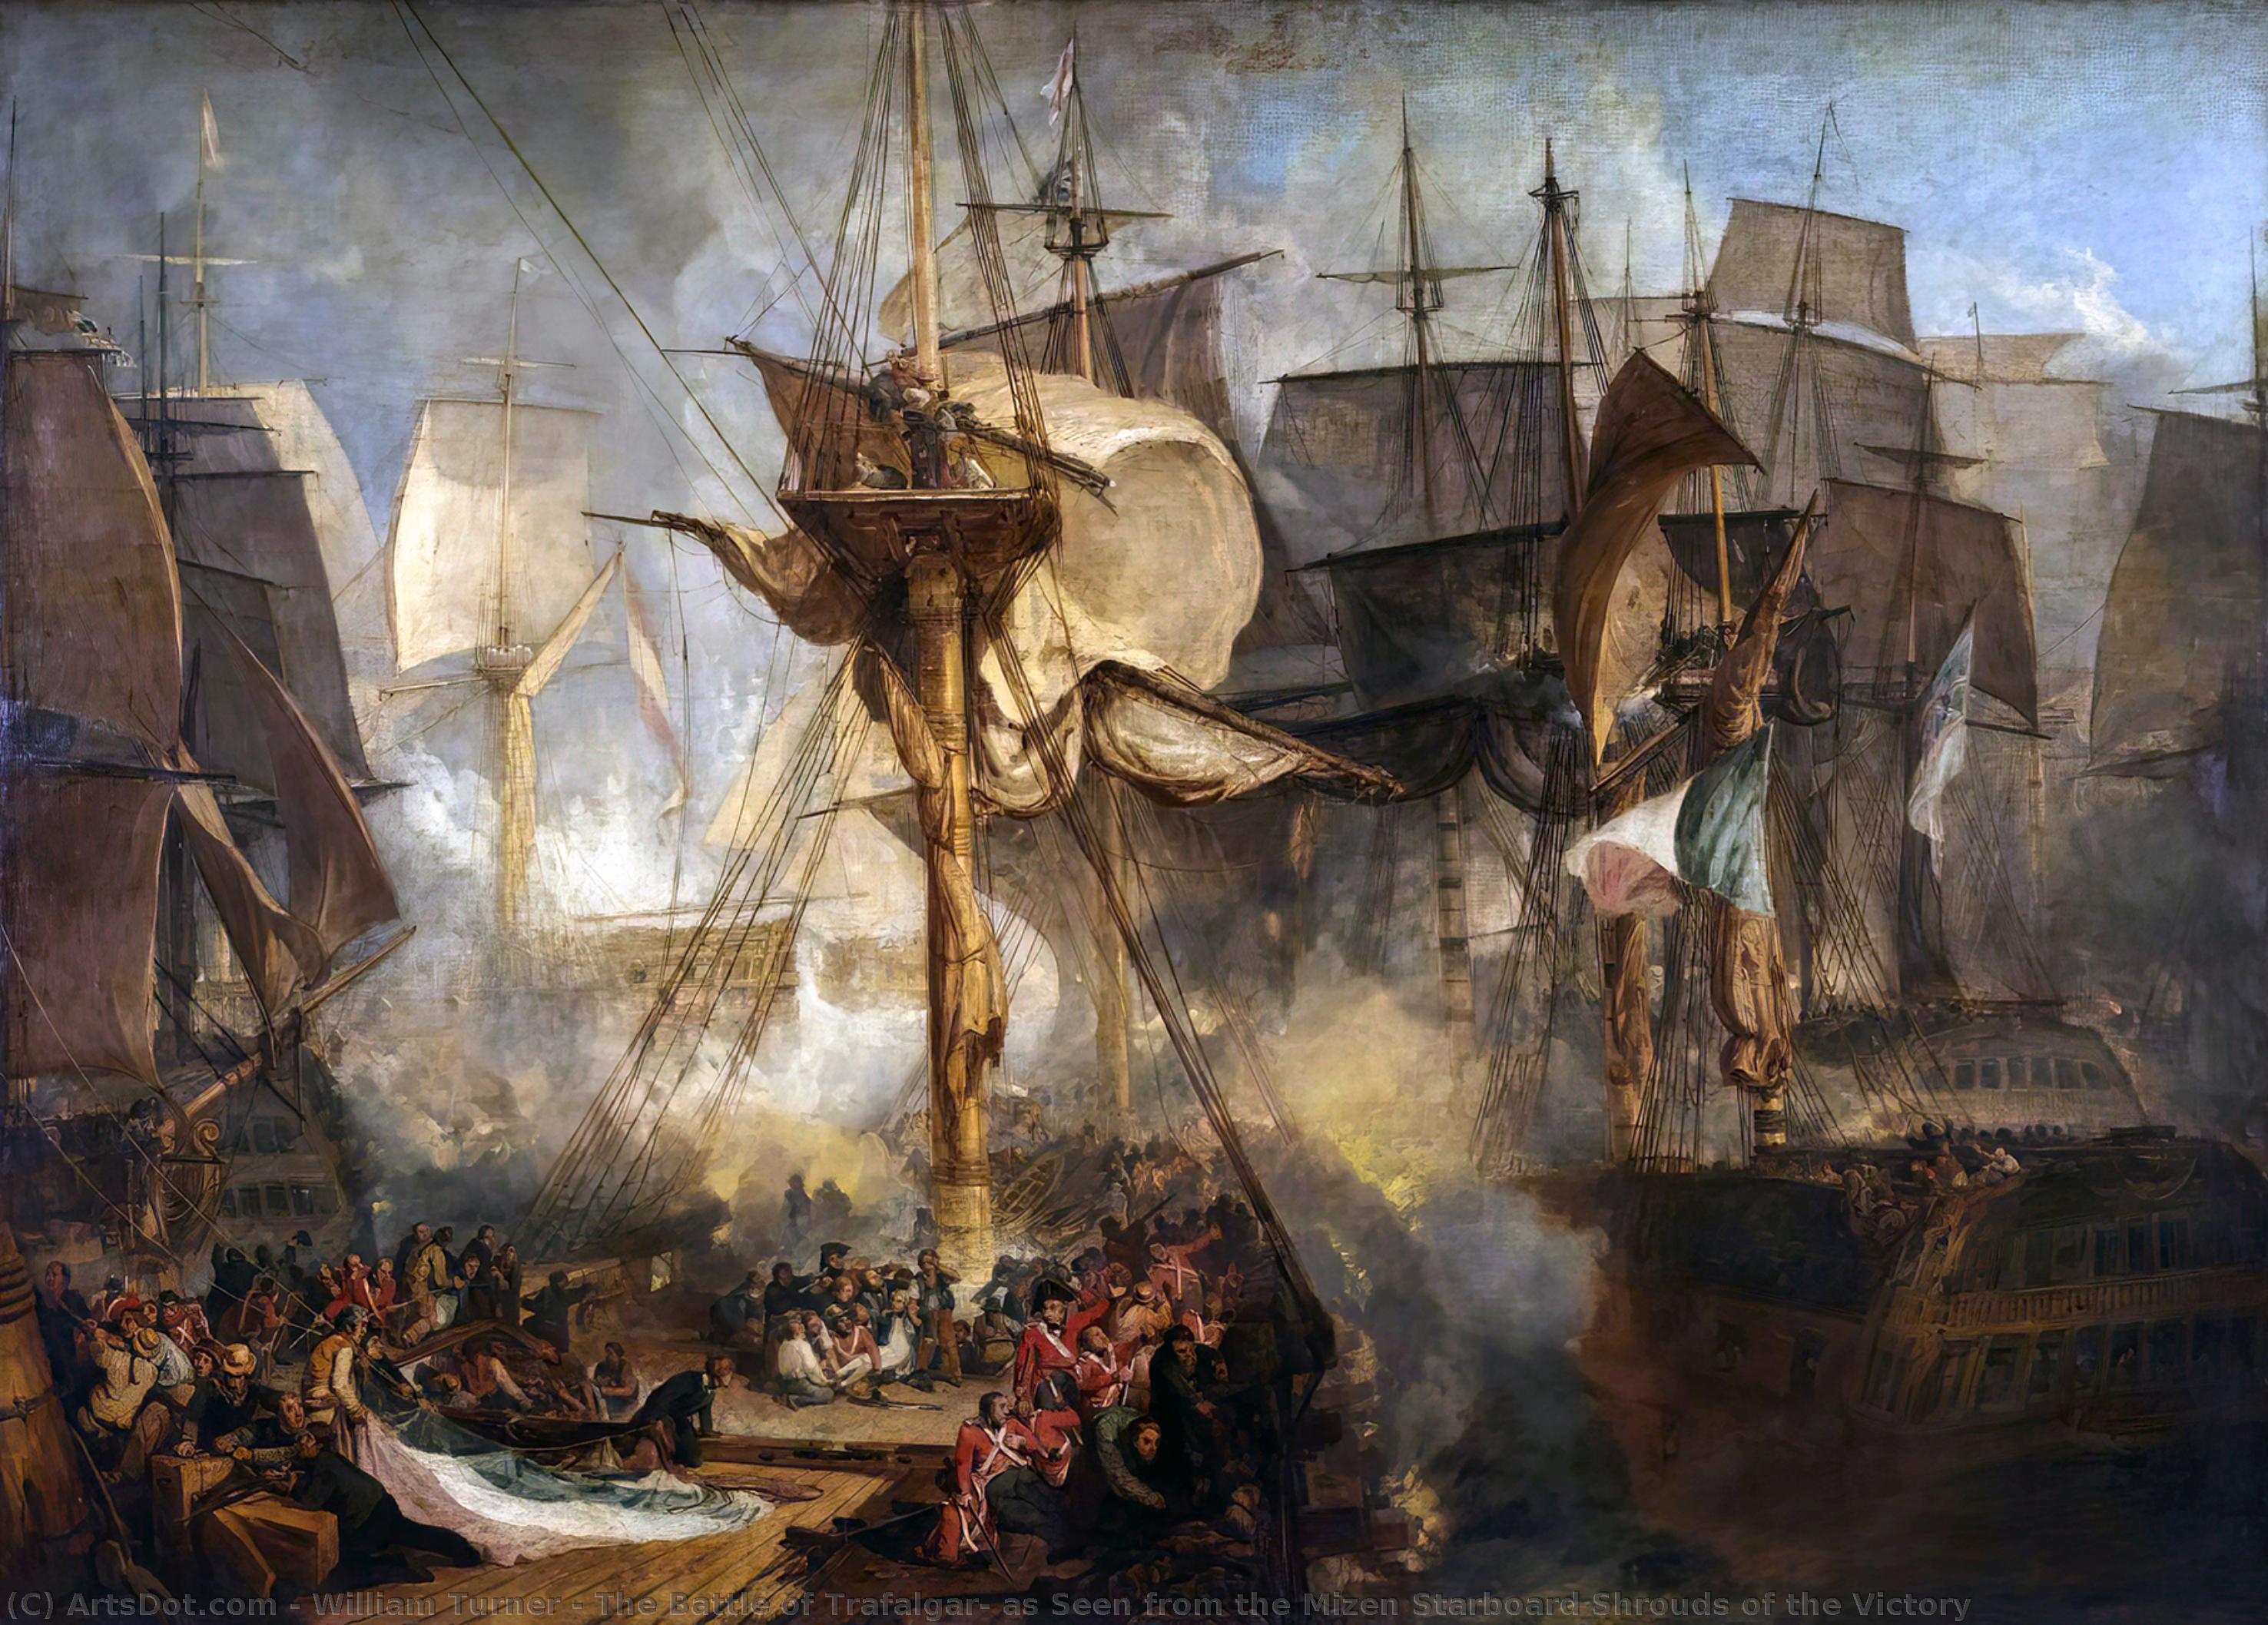 WikiOO.org - 백과 사전 - 회화, 삽화 William Turner - The Battle of Trafalgar, as Seen from the Mizen Starboard Shrouds of the Victory